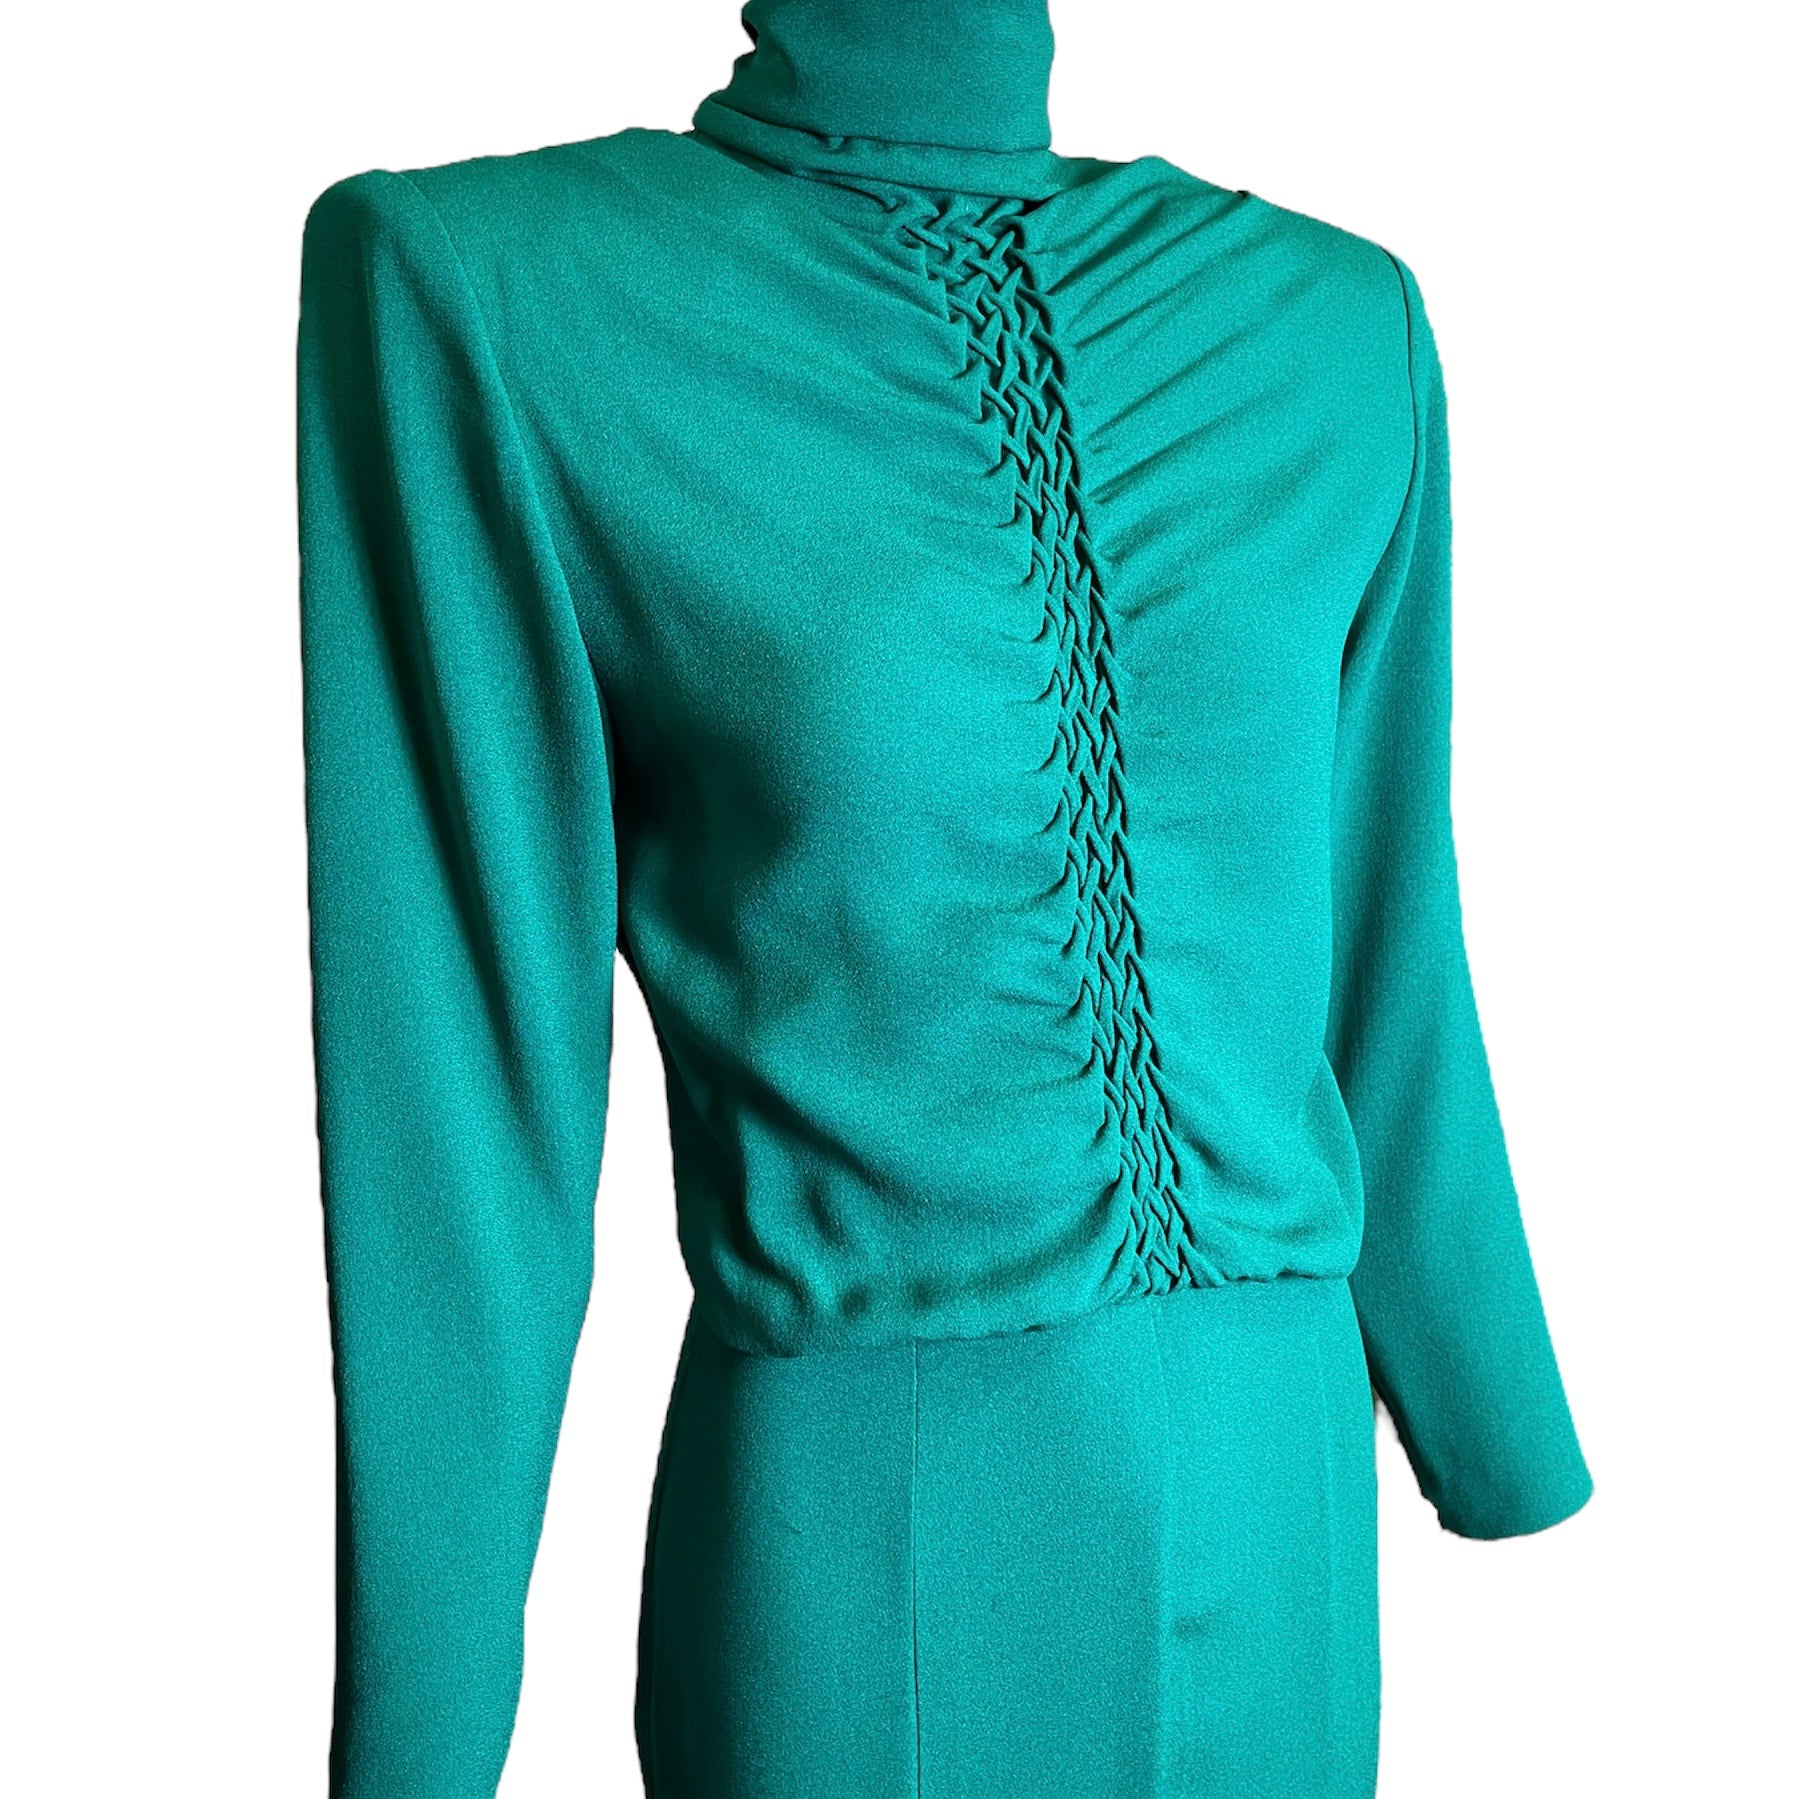 Galanos 80s Emerald Green Gown w/ Woven Front Detail DETAIL PHOTO 2 OF 5